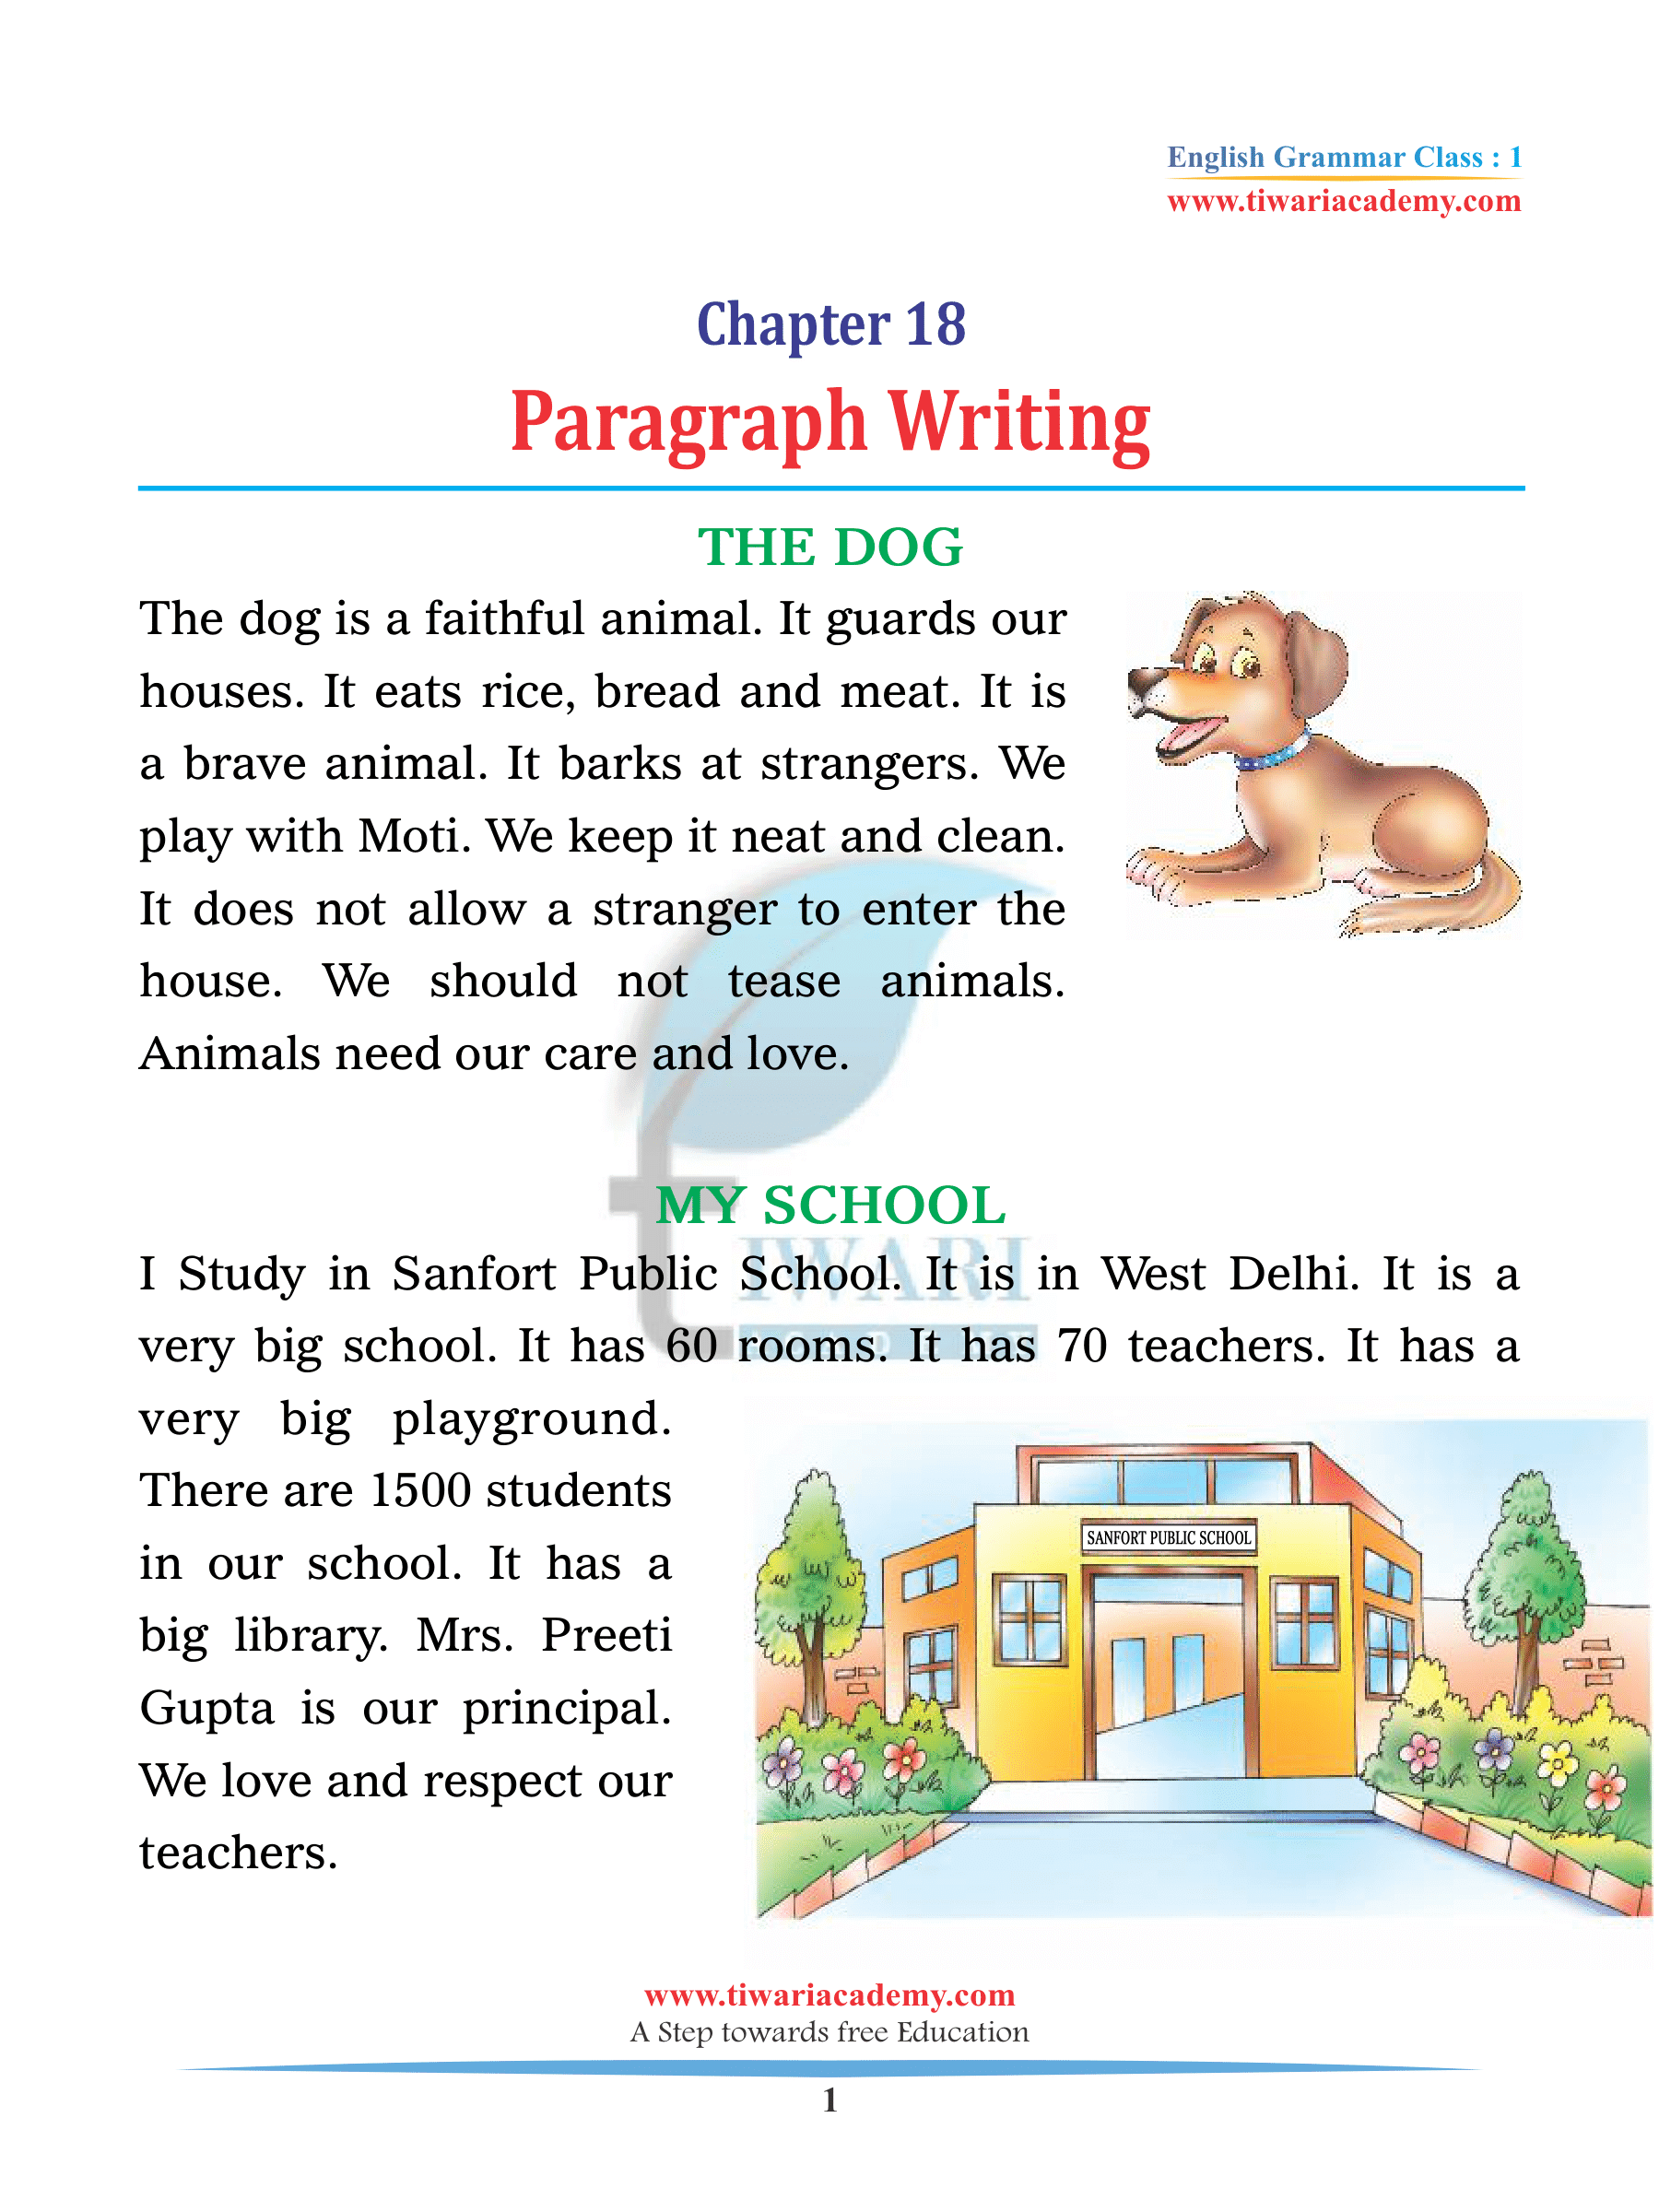 Class 1 English Grammar Chapter 18 Paragraph Writing with Examples.